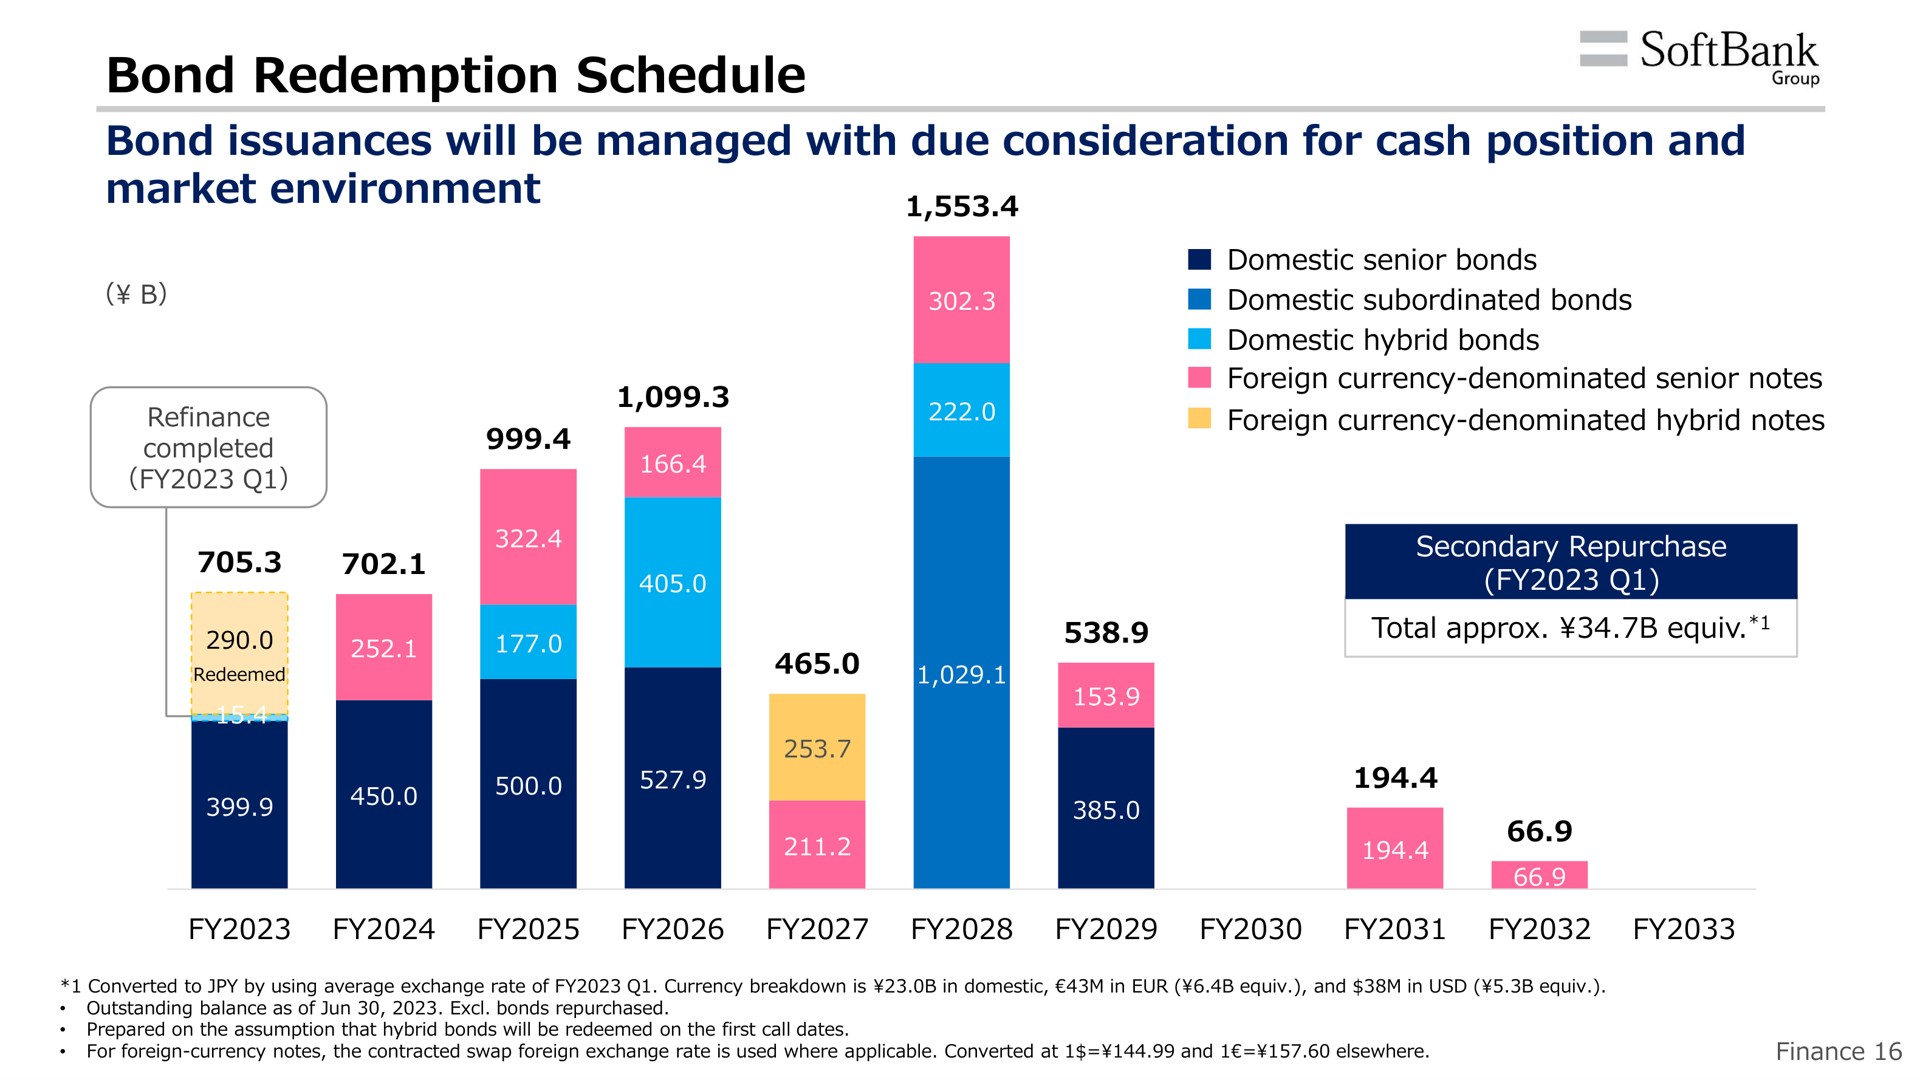 bond redemption schedule bond issuances will be managed with due consideration for cash position and market environment group | SoftBank